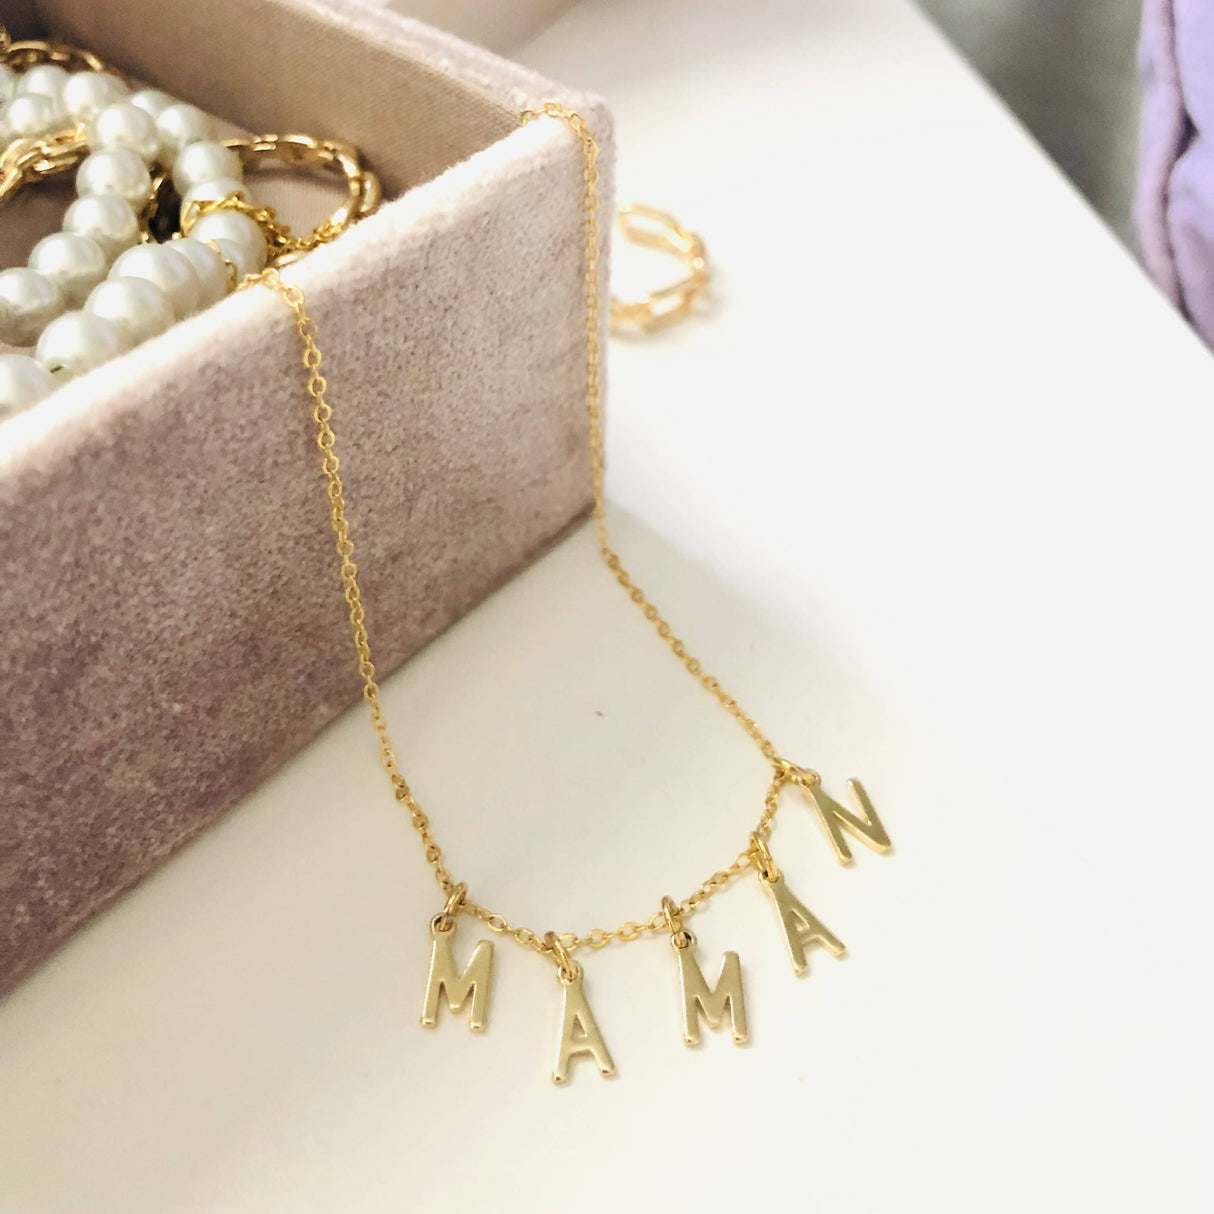 Maman Necklace